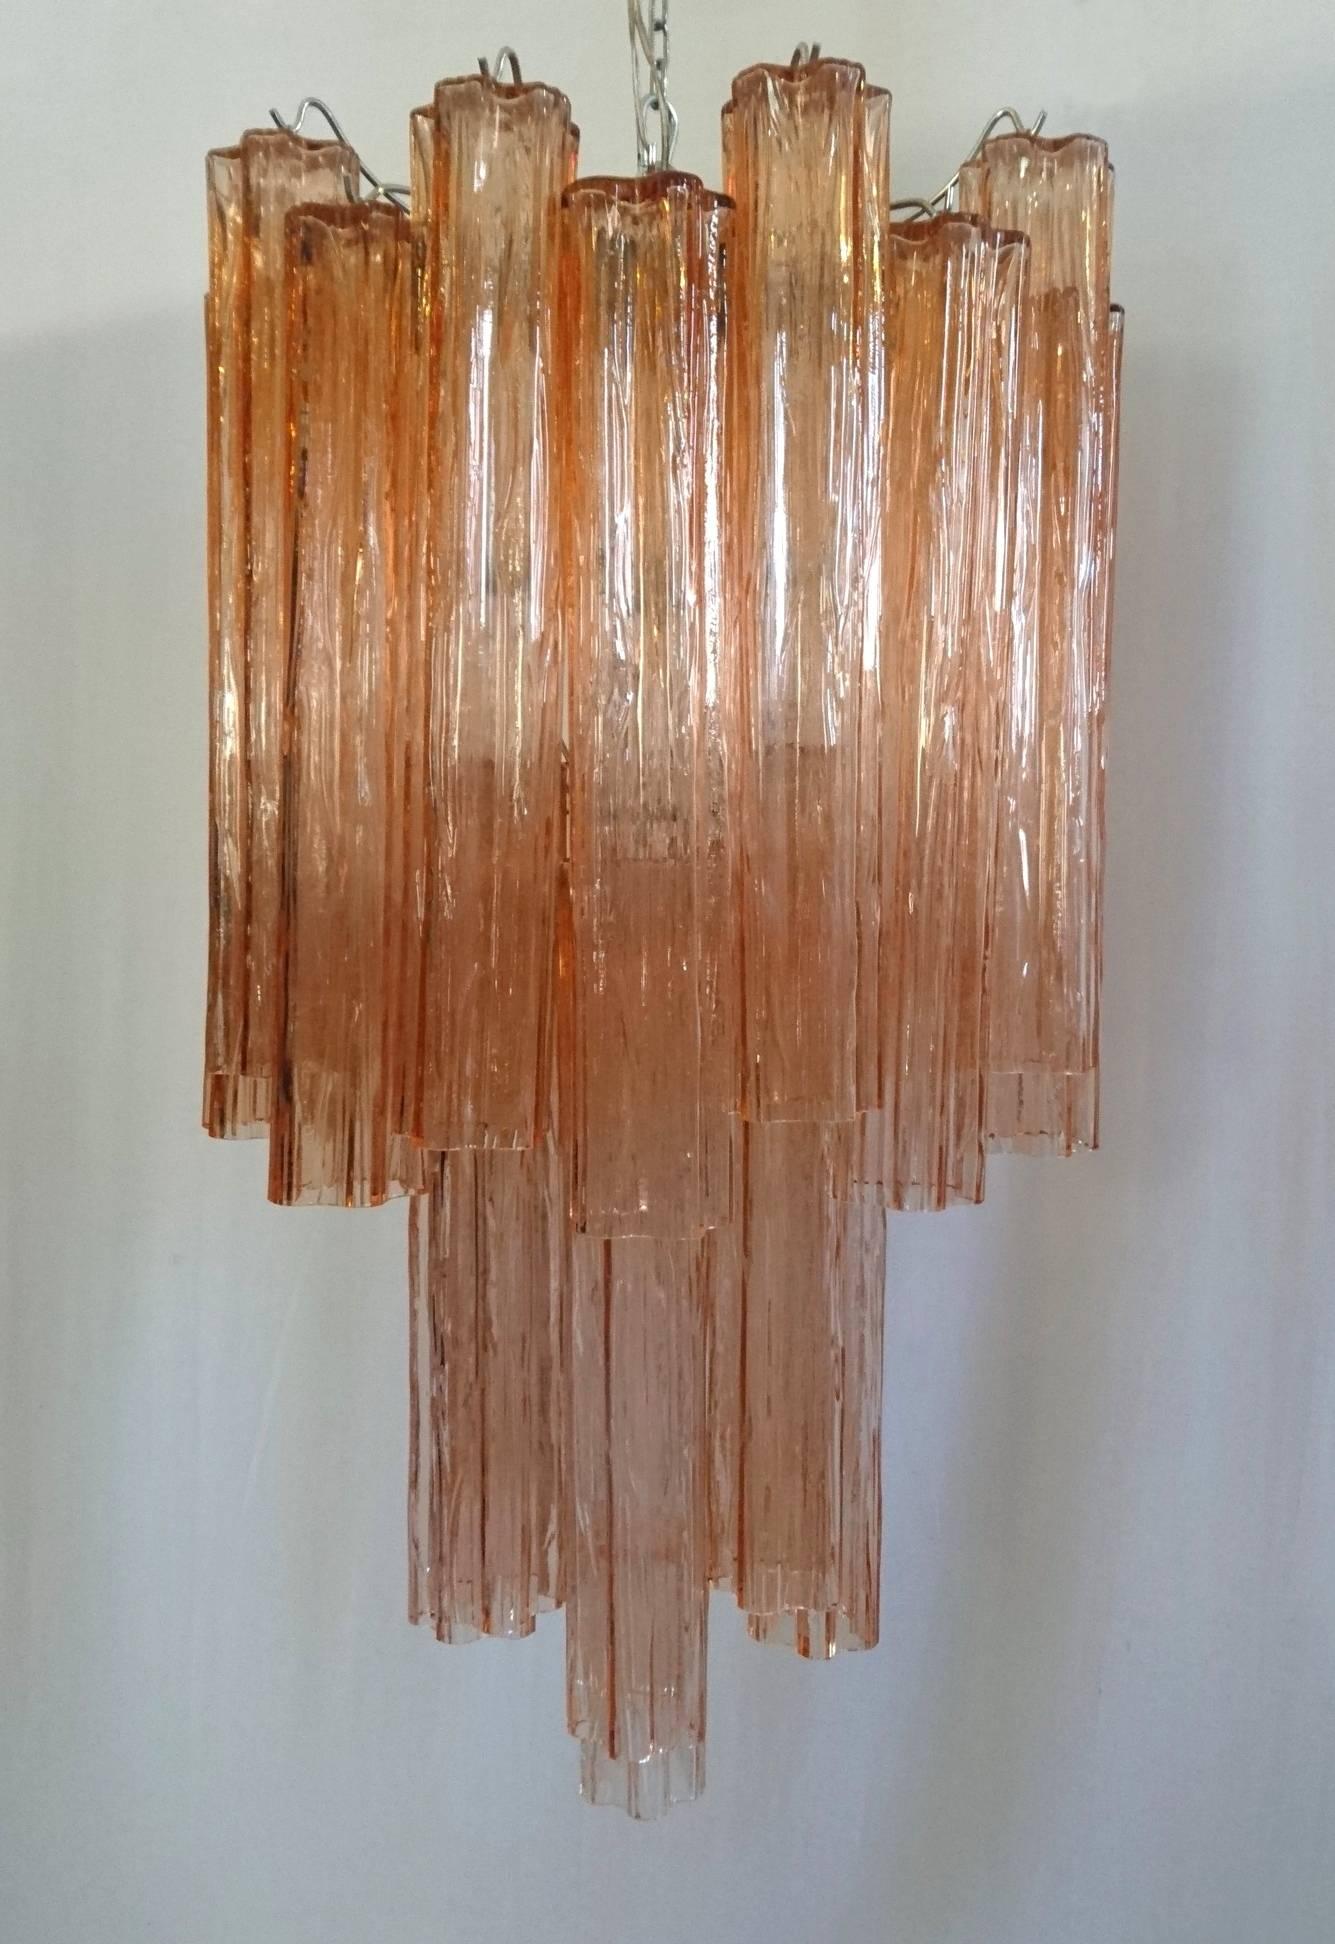 A so-called Tronchi chandelier in a rare pink color by Toni Zuccheri for Venini with Murano glass tubes measuring 45 cm each. In excellent condition. In total 10 lights but an additional 4 can be added to the structure.
The final length can be